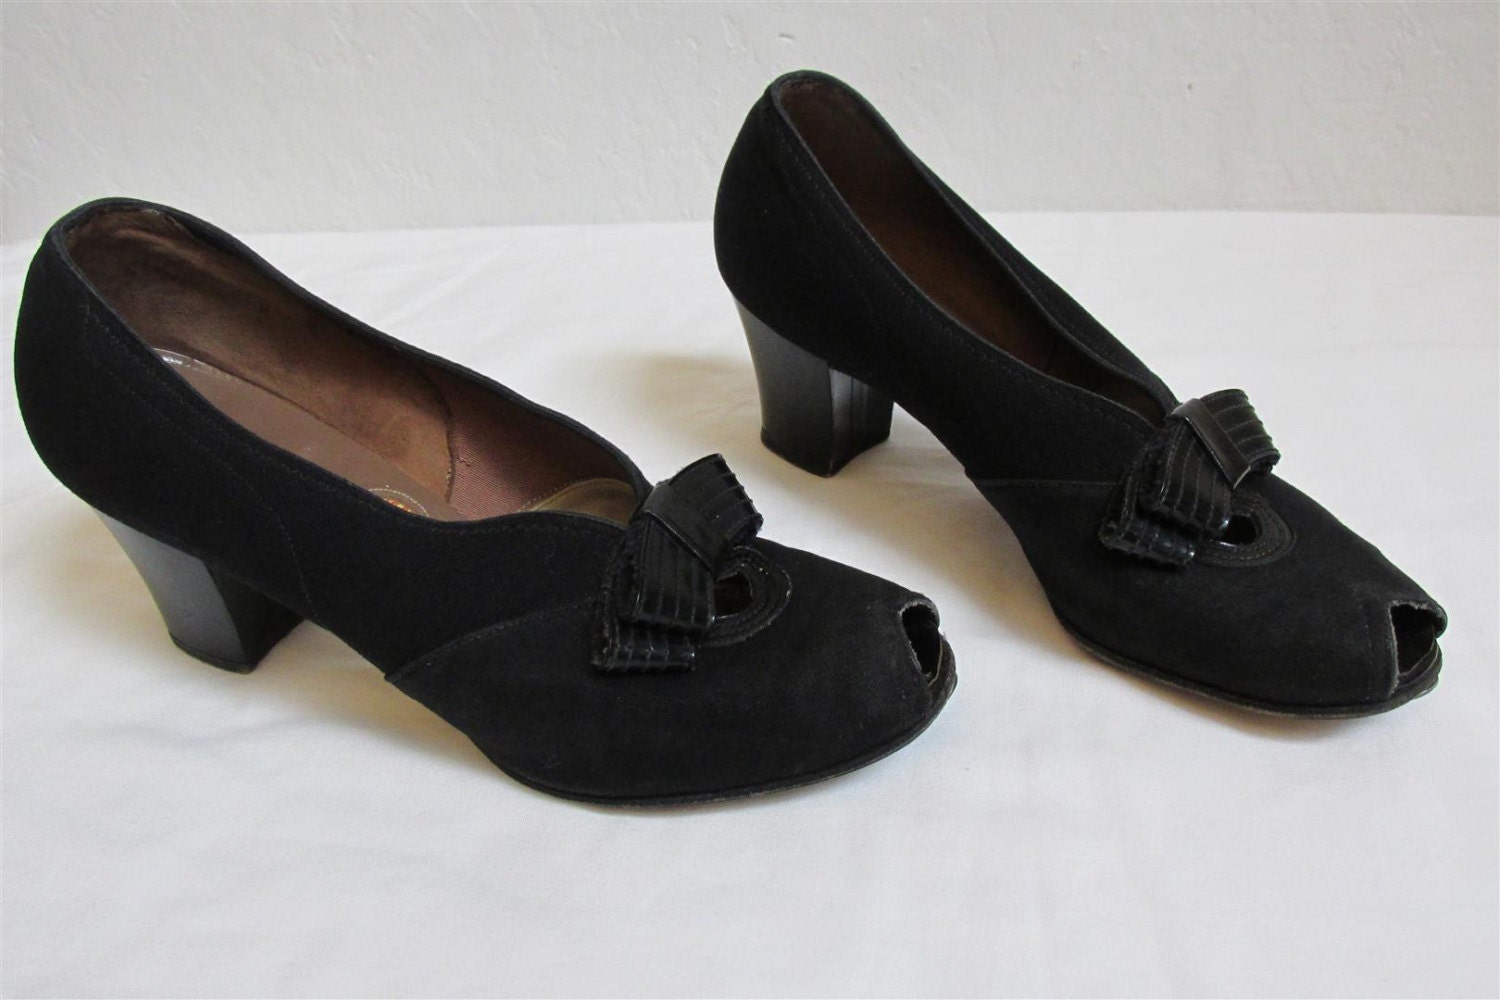 Reserved for Rachael 1940's Black Peep Toe Dance Shoes